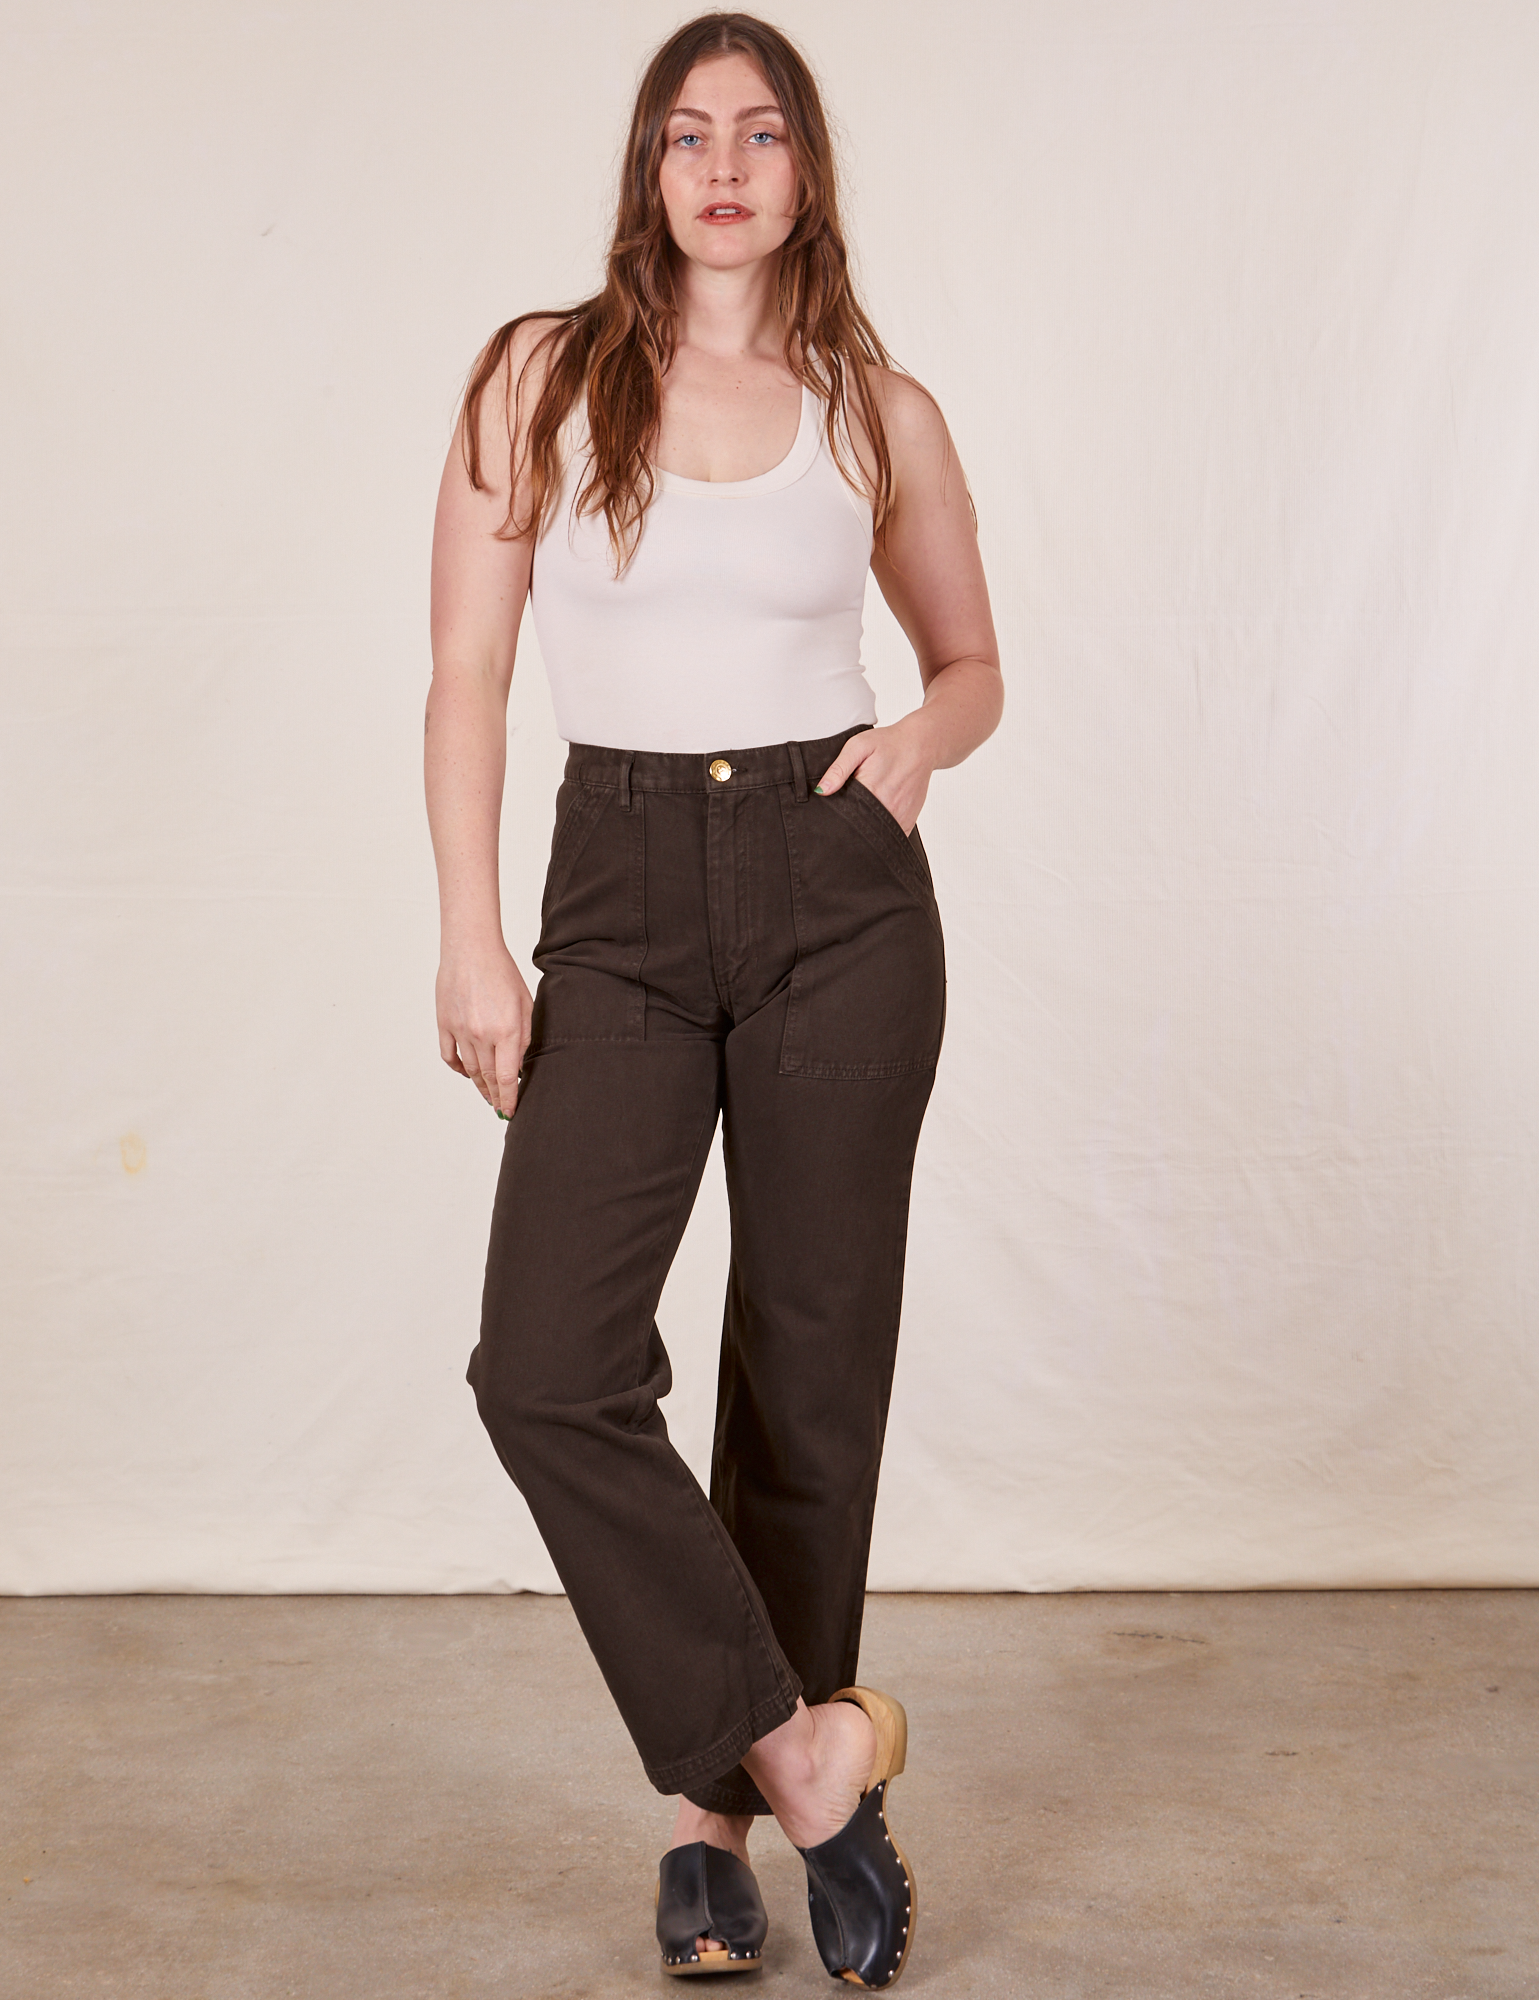 Allison is 5&#39;10&quot; and wearing Long S Work Pants in Espresso Brown paired with a Tank Top in vintage tee off-white